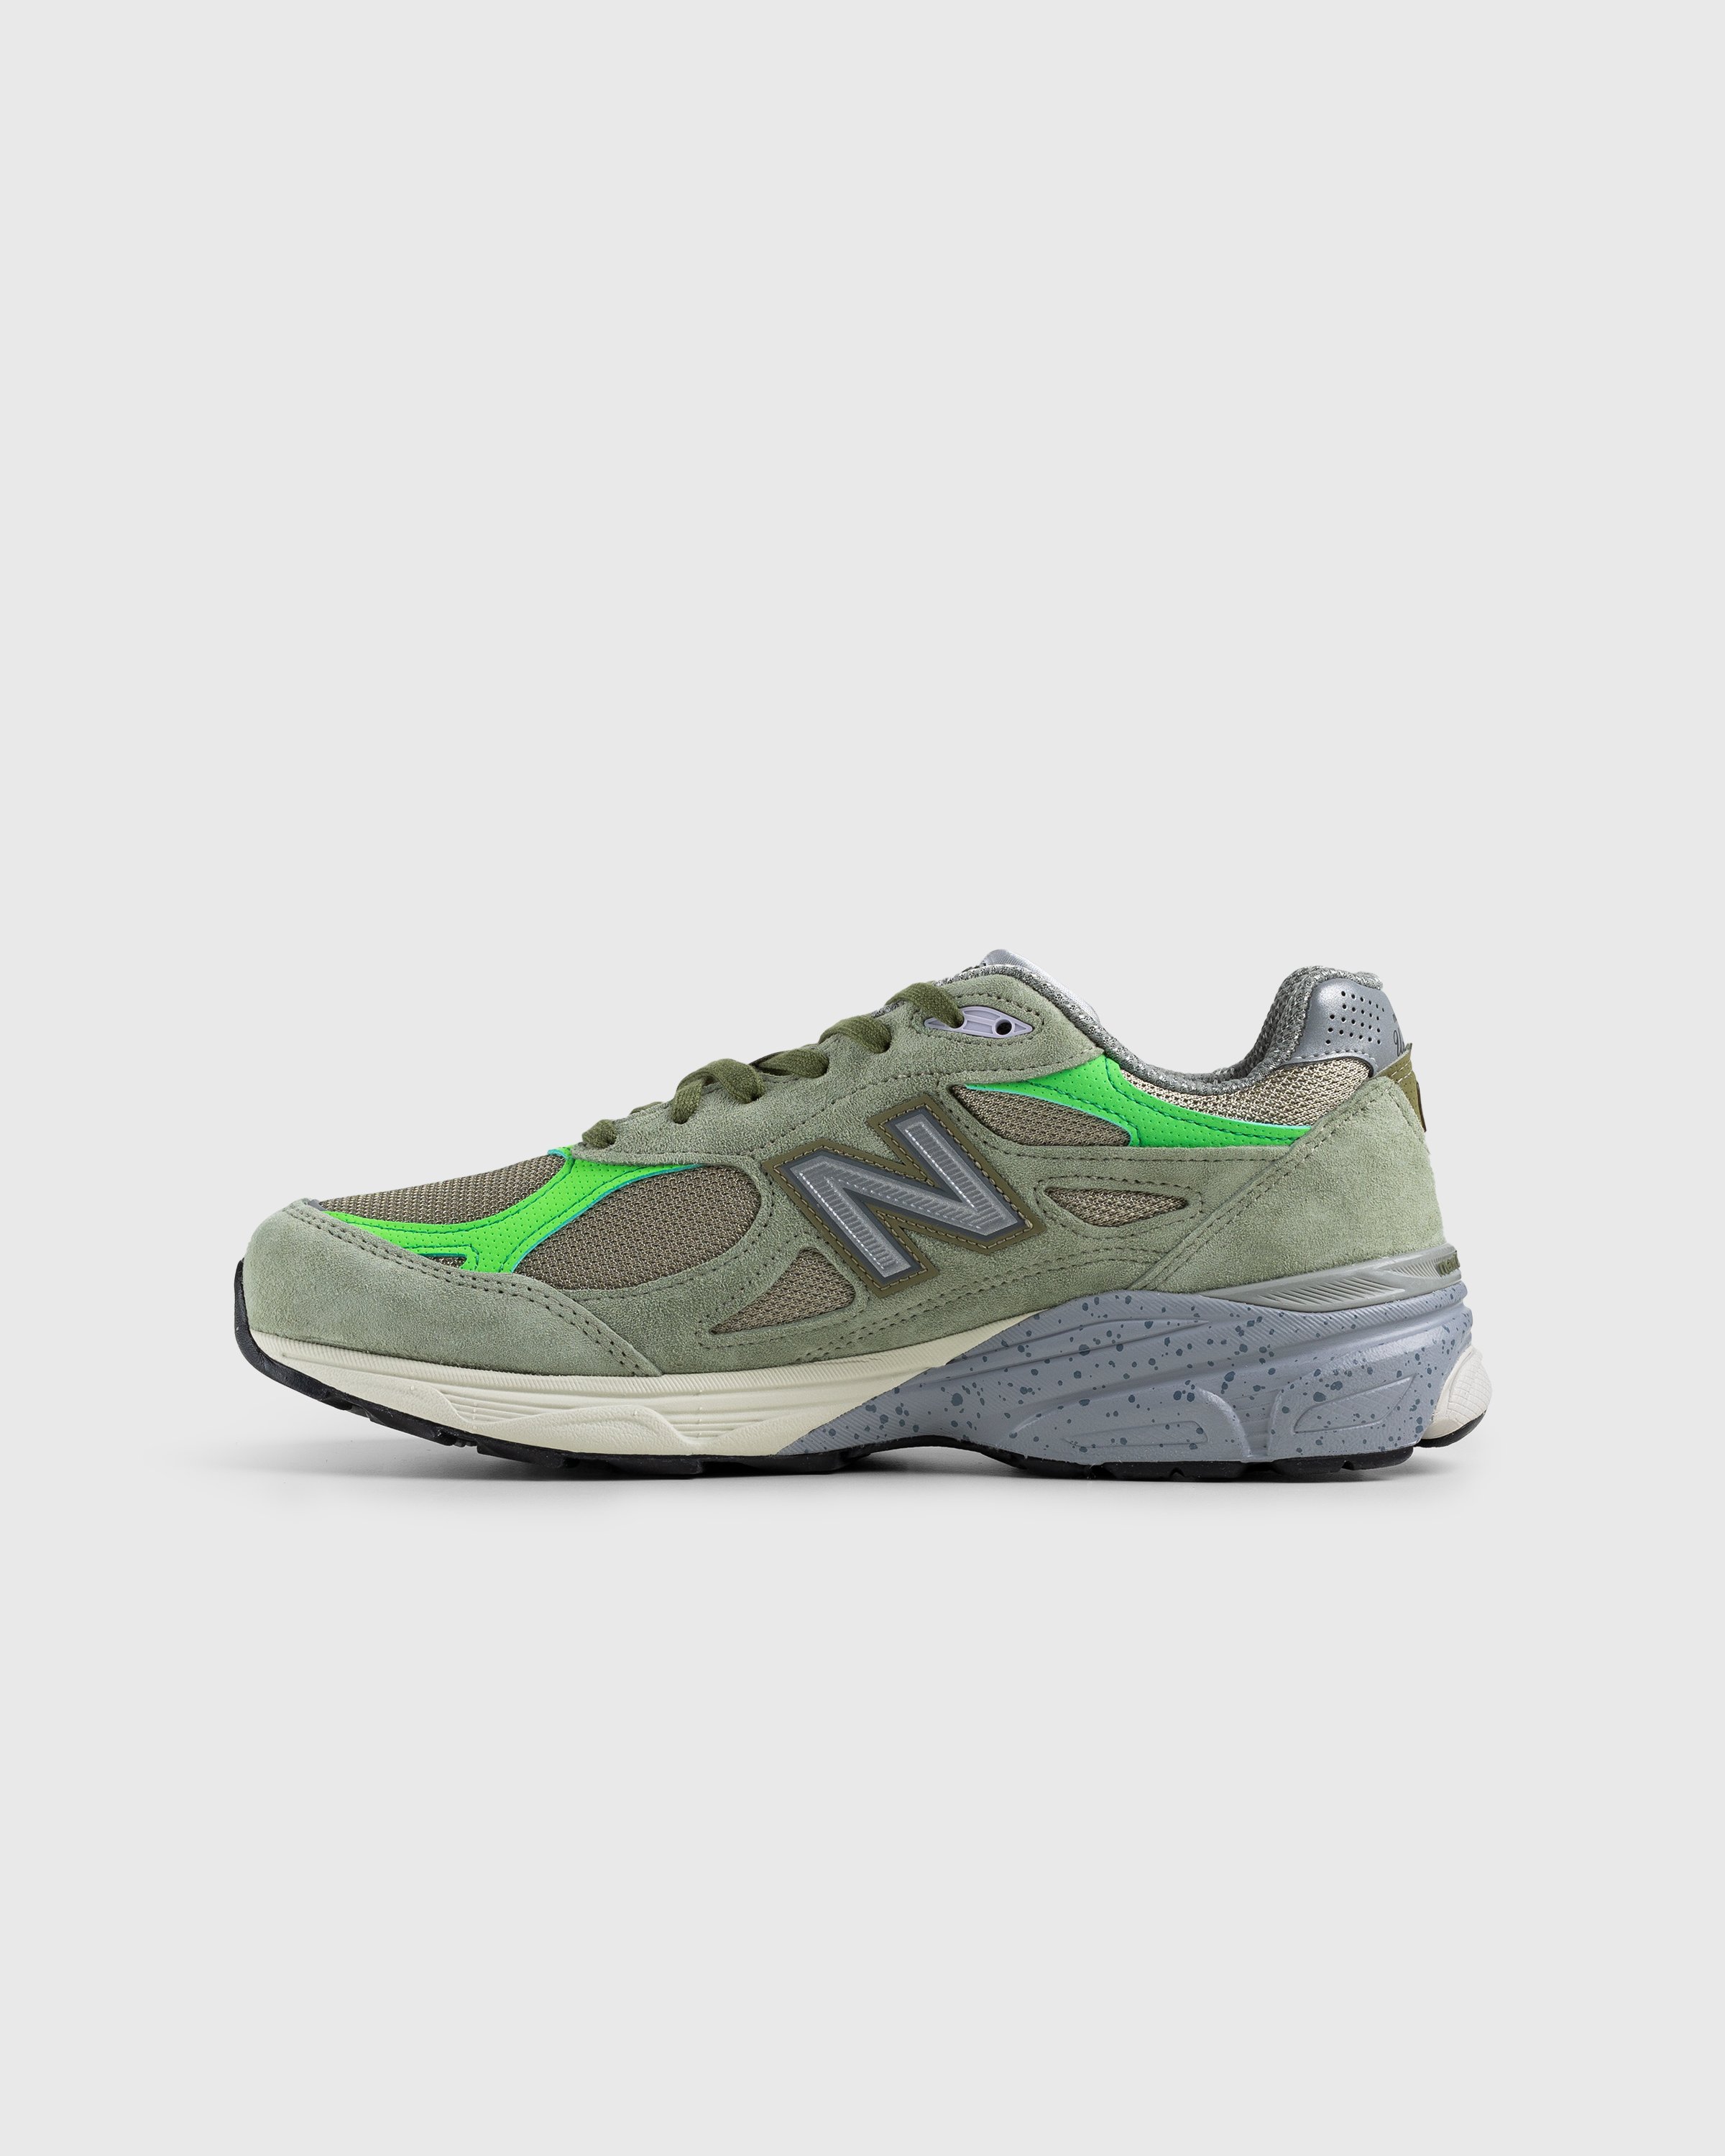 Patta x New Balance - M990PP3 Made in USA 990v3 Olive/White Pepper - Footwear - Green - Image 3